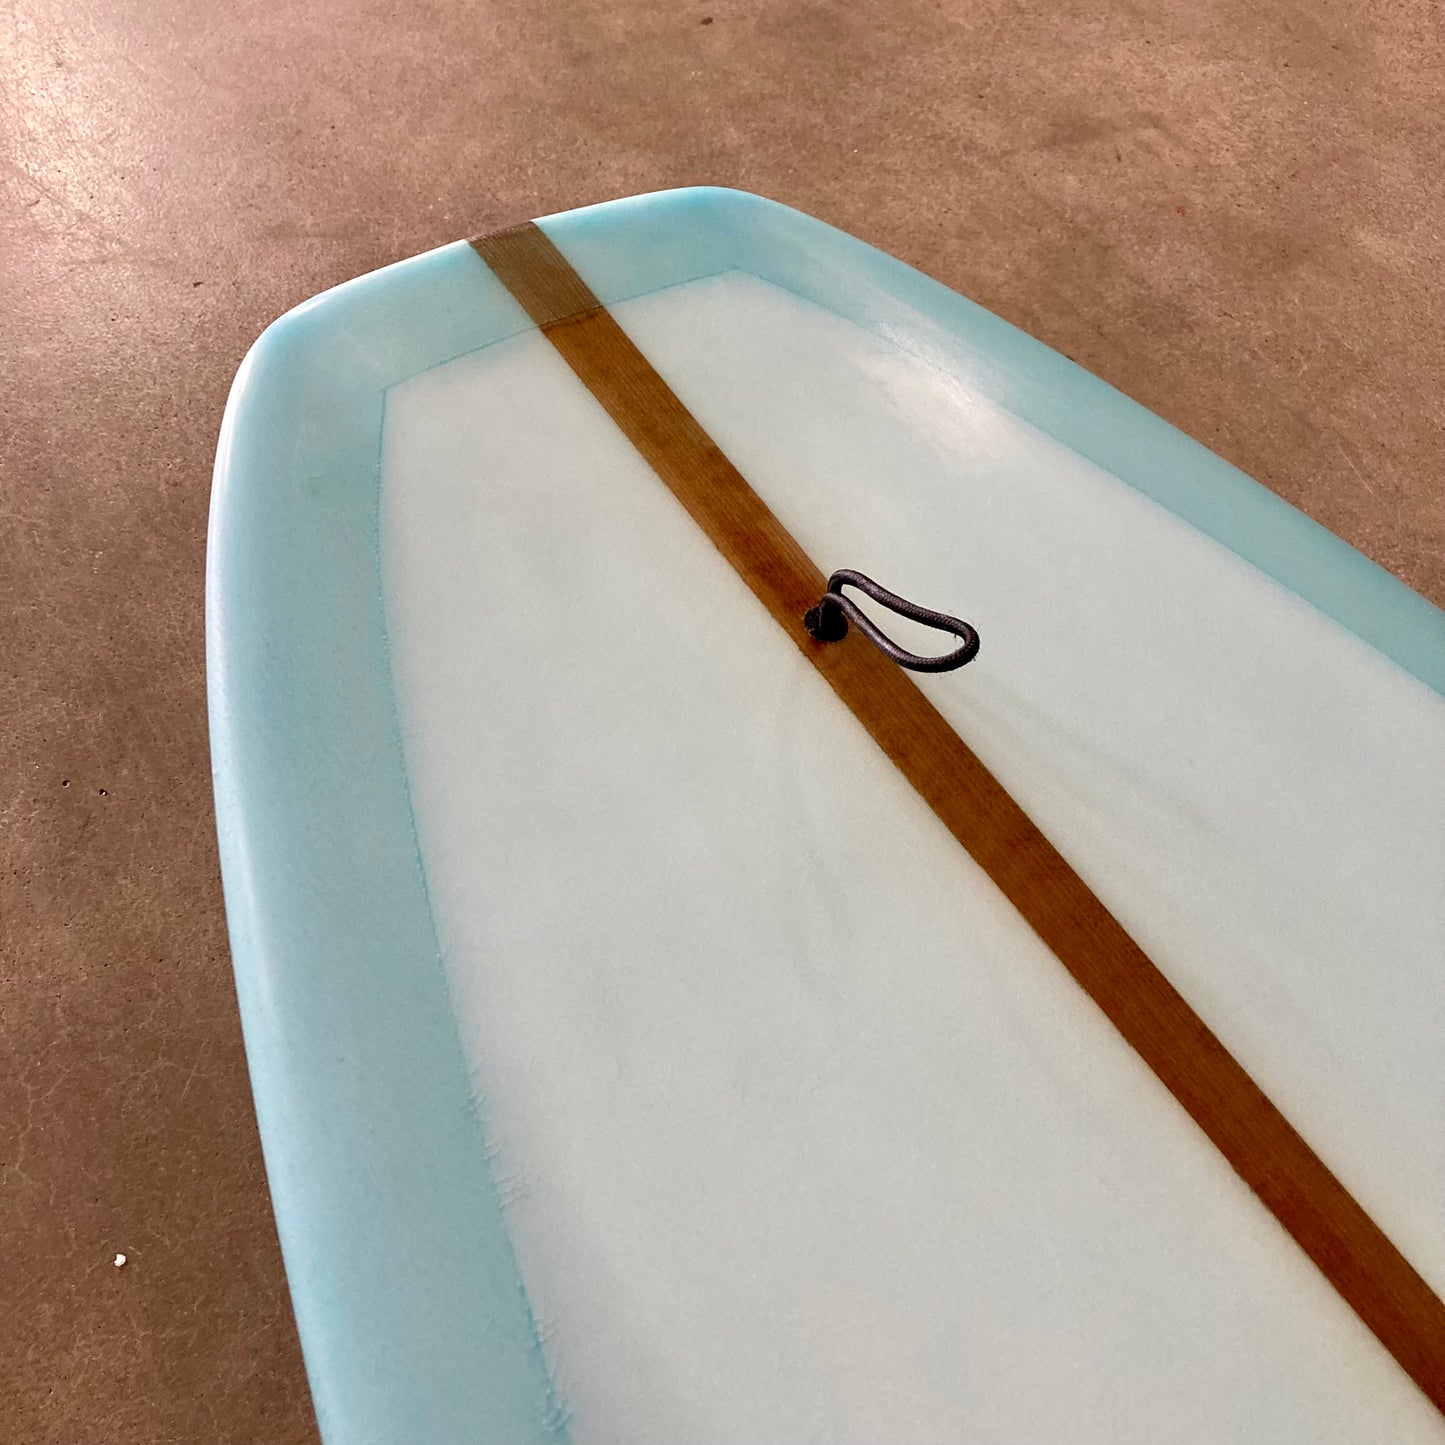 Used Russell - 9'6" Snub-Nose